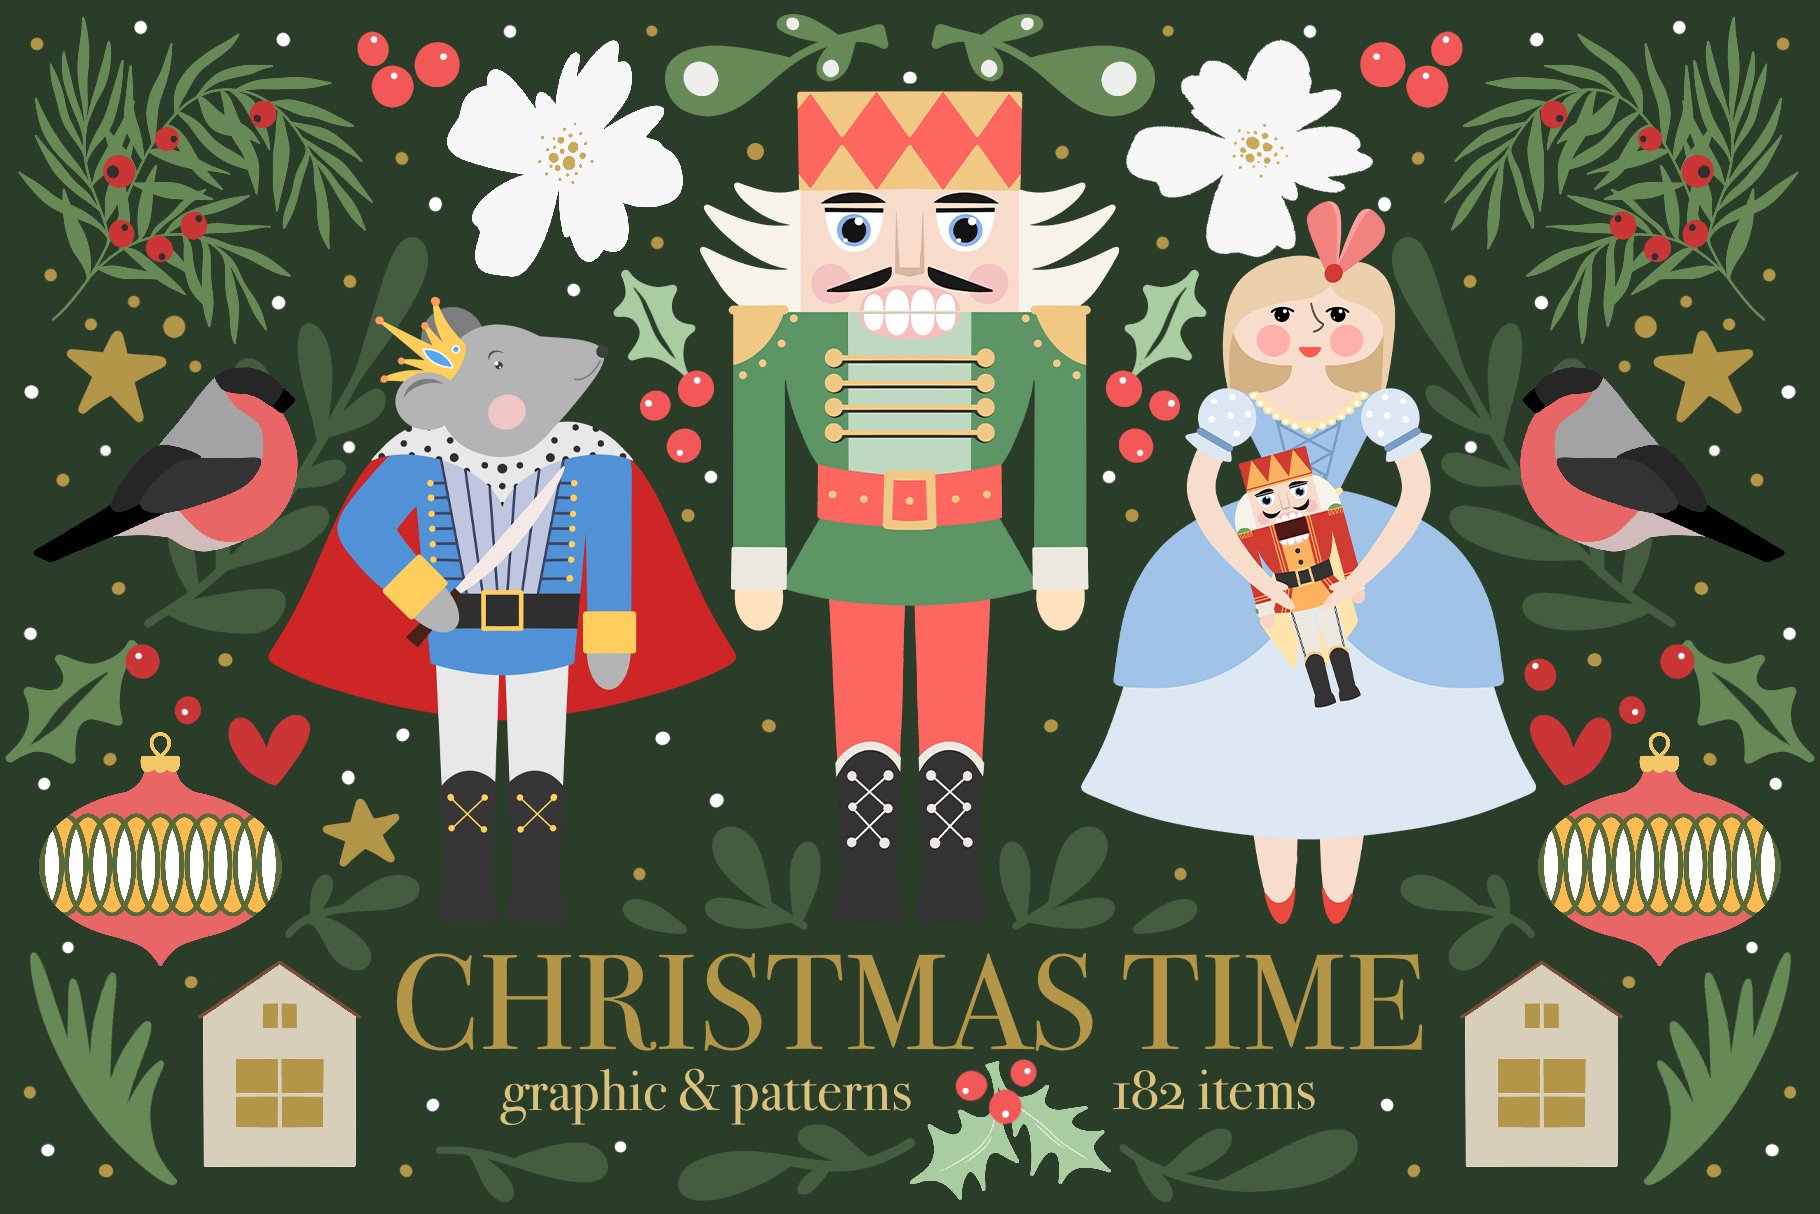 Christmas Time - Clipart Collection cover image.